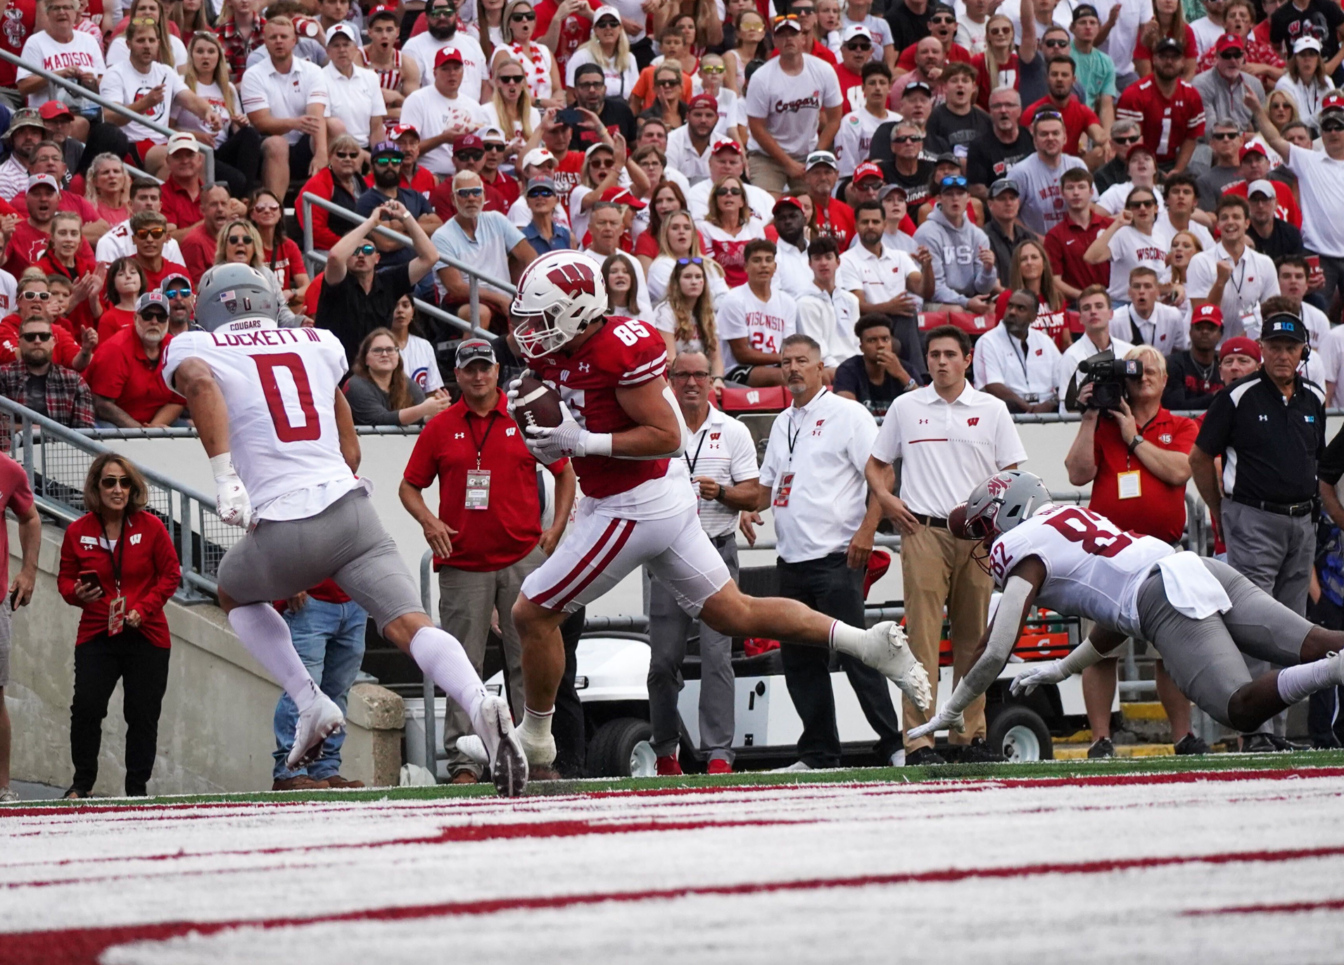 Football: No. 19 Wisconsin Badgers upset at home by Washington State, 17-14